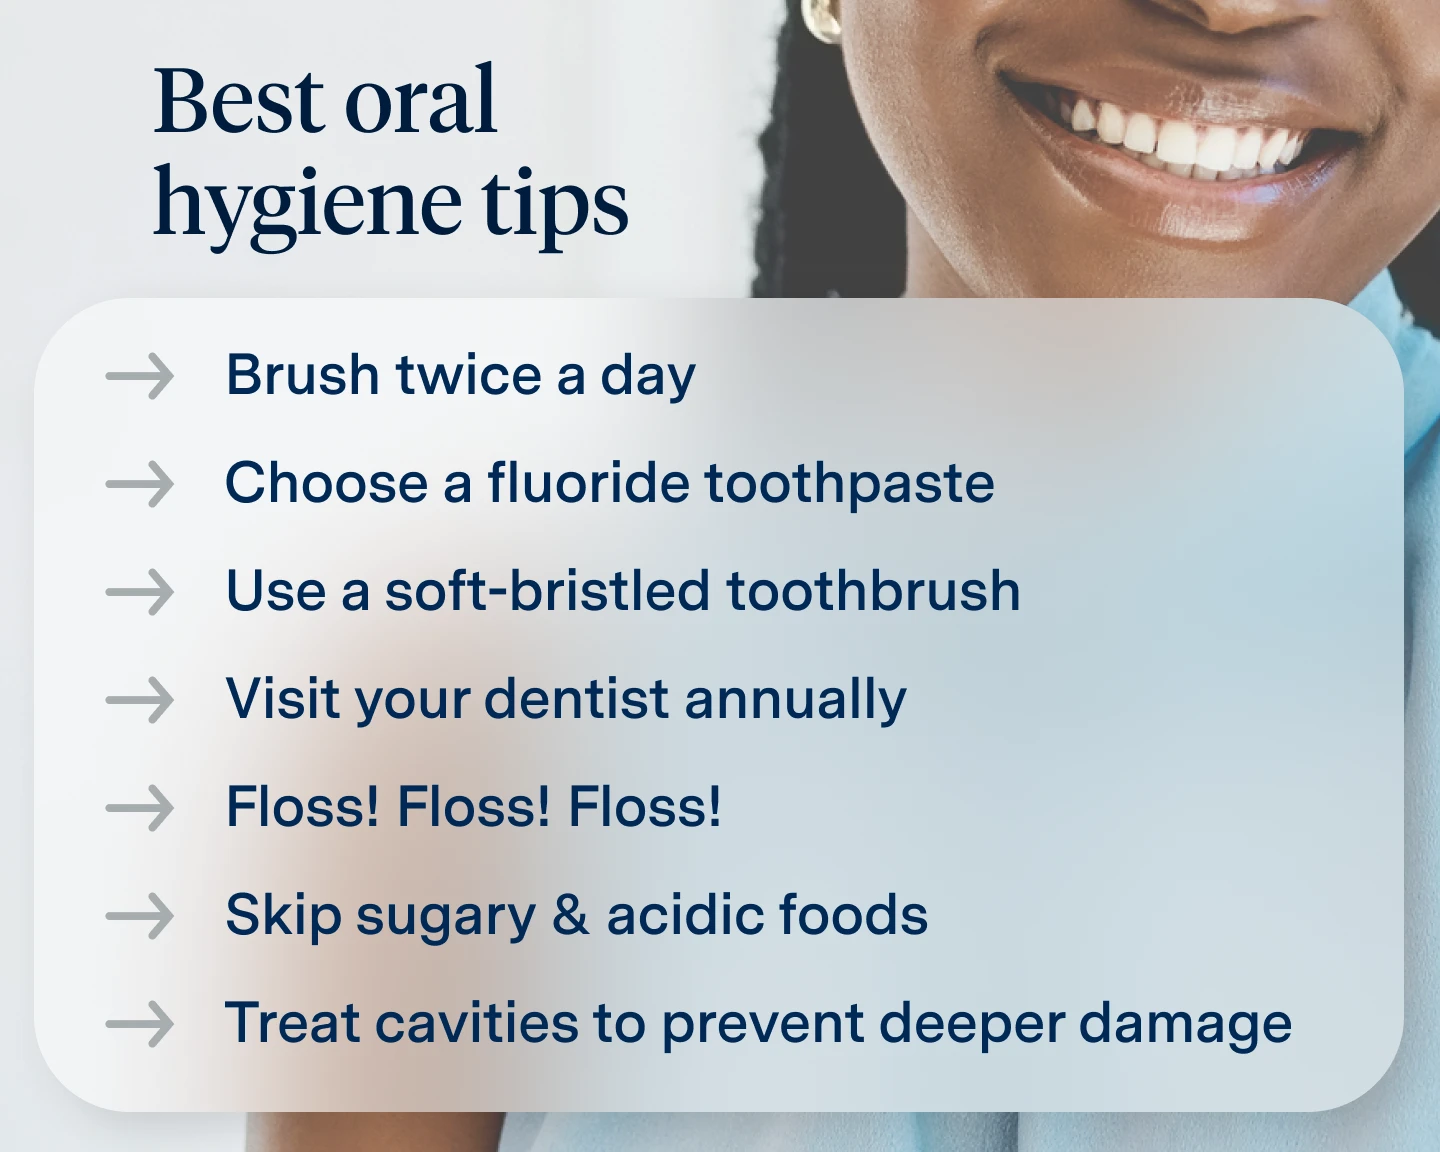 Best Oral Hygiene tips. Brush twice a fay, choose a flouride toothpaste, use a soft-bristled toothbrush, visit your dentist annually, floss, skip sugary and acidic foods, treat cavities to prevent deeper damage. 